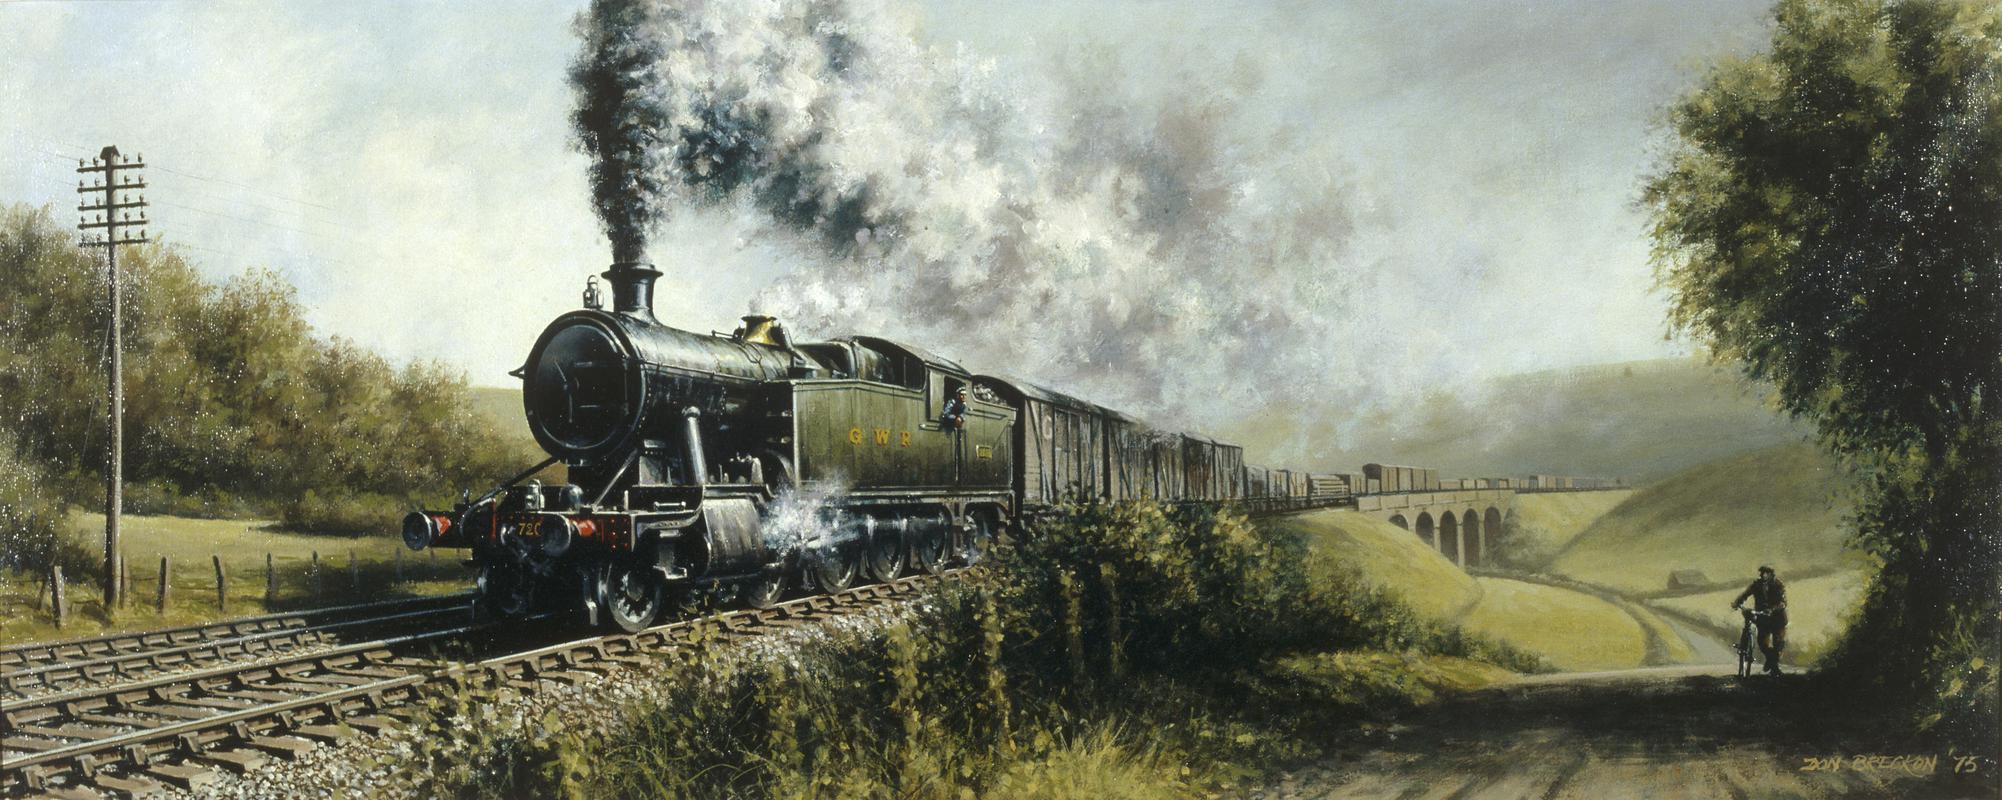 GWR Freight Train in South Wales headed by Locomotive 720X